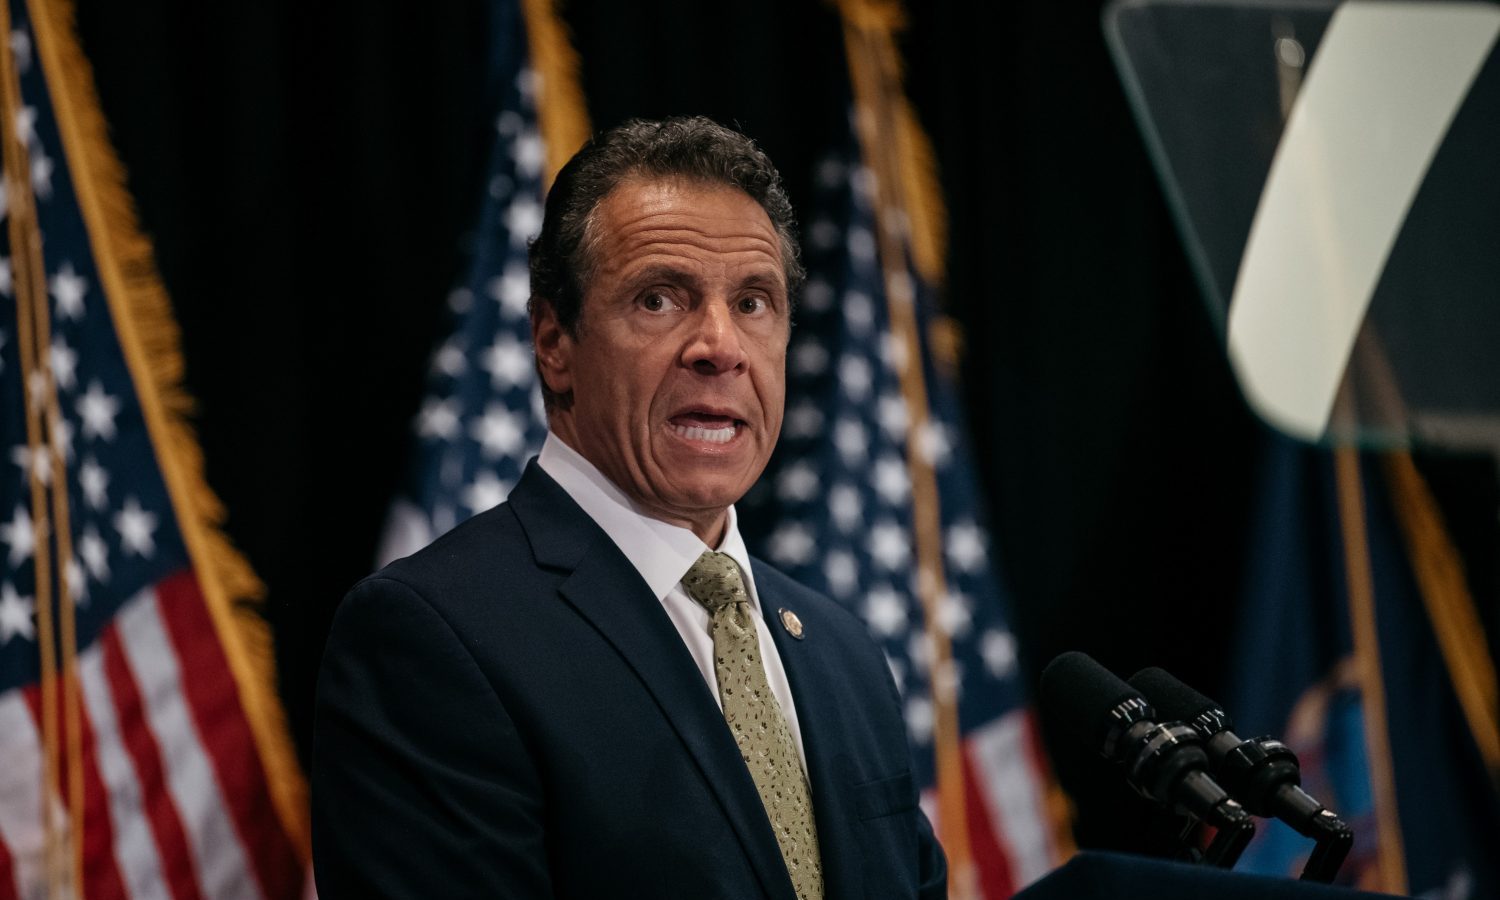 New York Gov. Cuomo Wants To Legalize Weed, But It Won't Be Easy — Here's Why